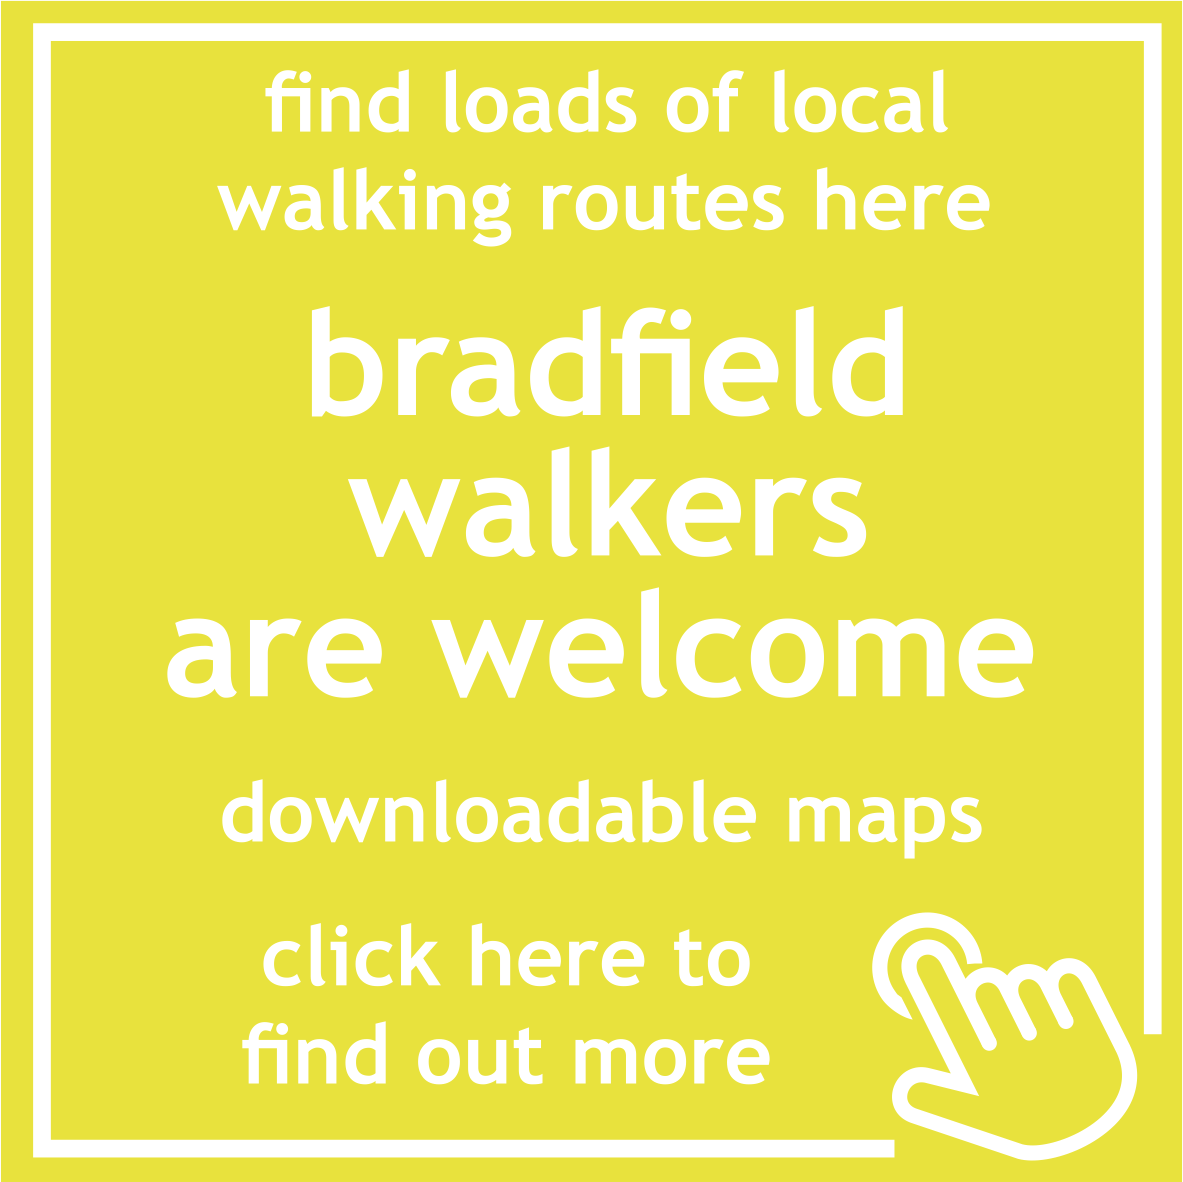 great resource for local walks